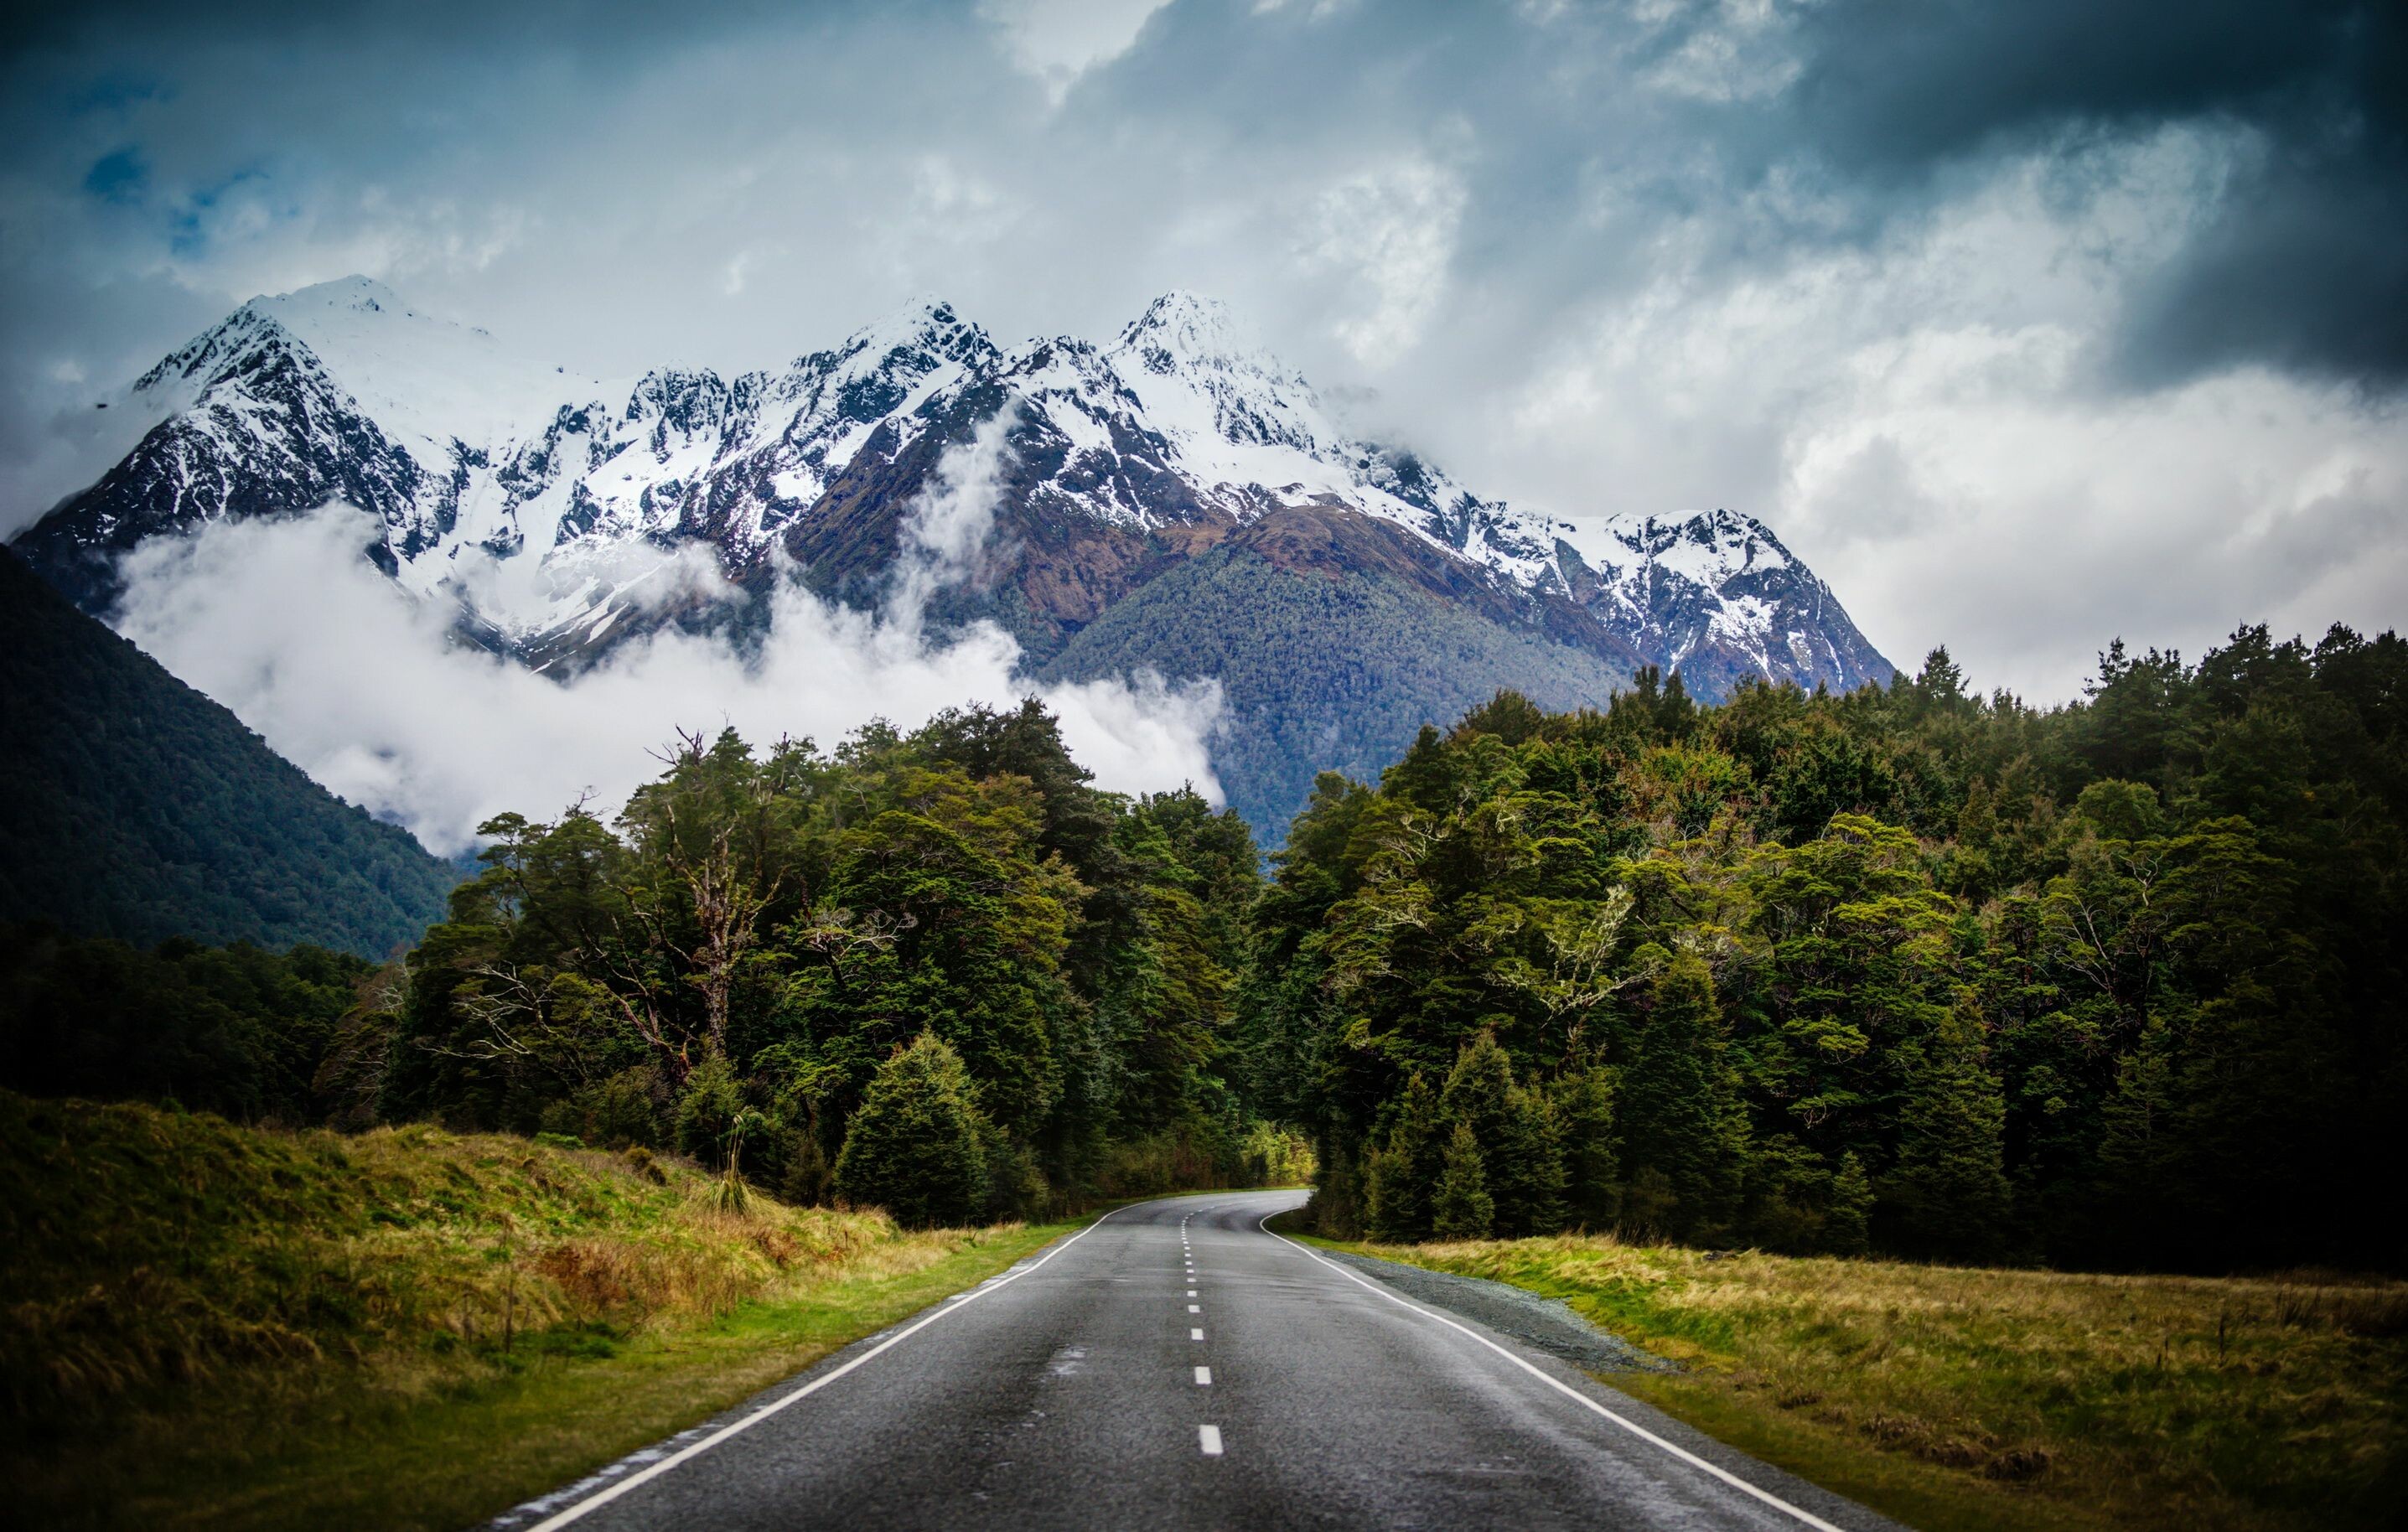 Landscape Of New Zealand Country Road Yellowed Grass, Rocky Peaks Of  Mountains With Snow, Dark Clouds Desktop Wallpaper Full Screen :  Wallpapers13.com